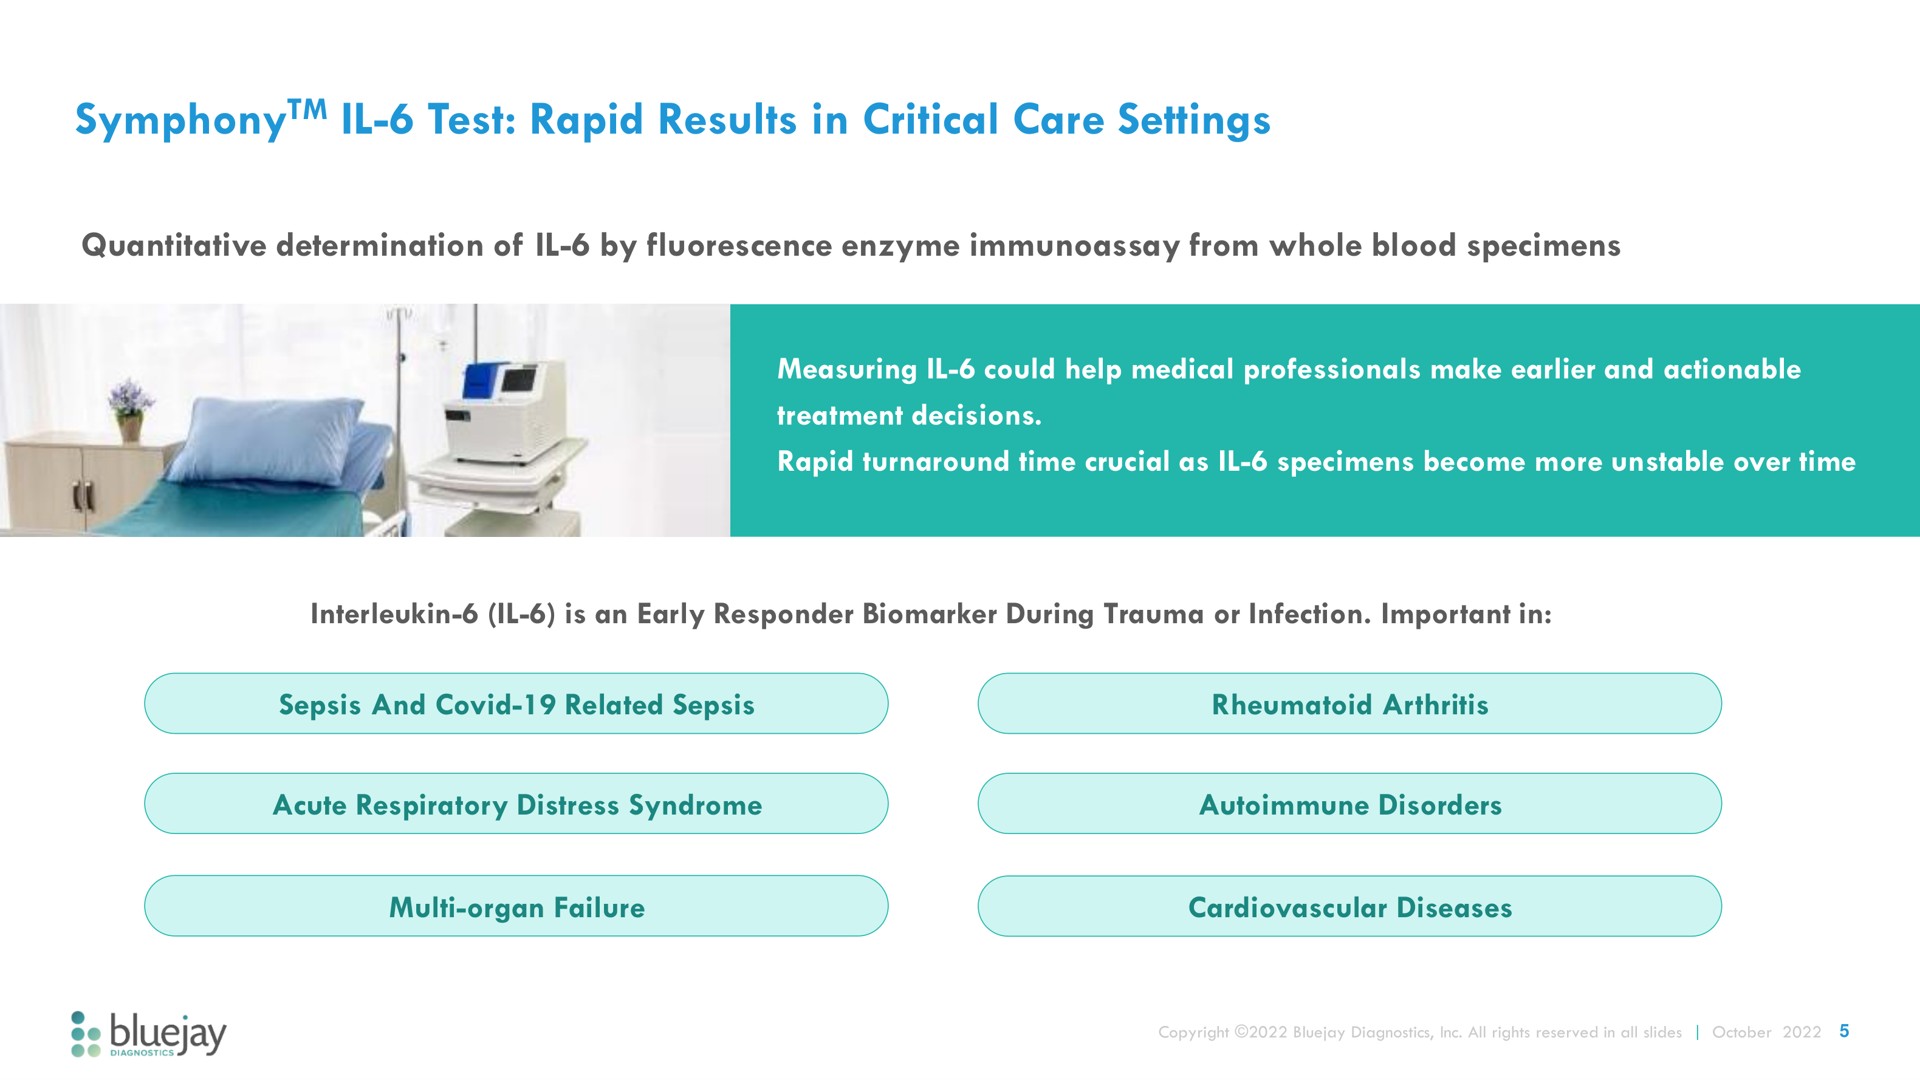 test rapid results in critical care settings symphony | Bluejay